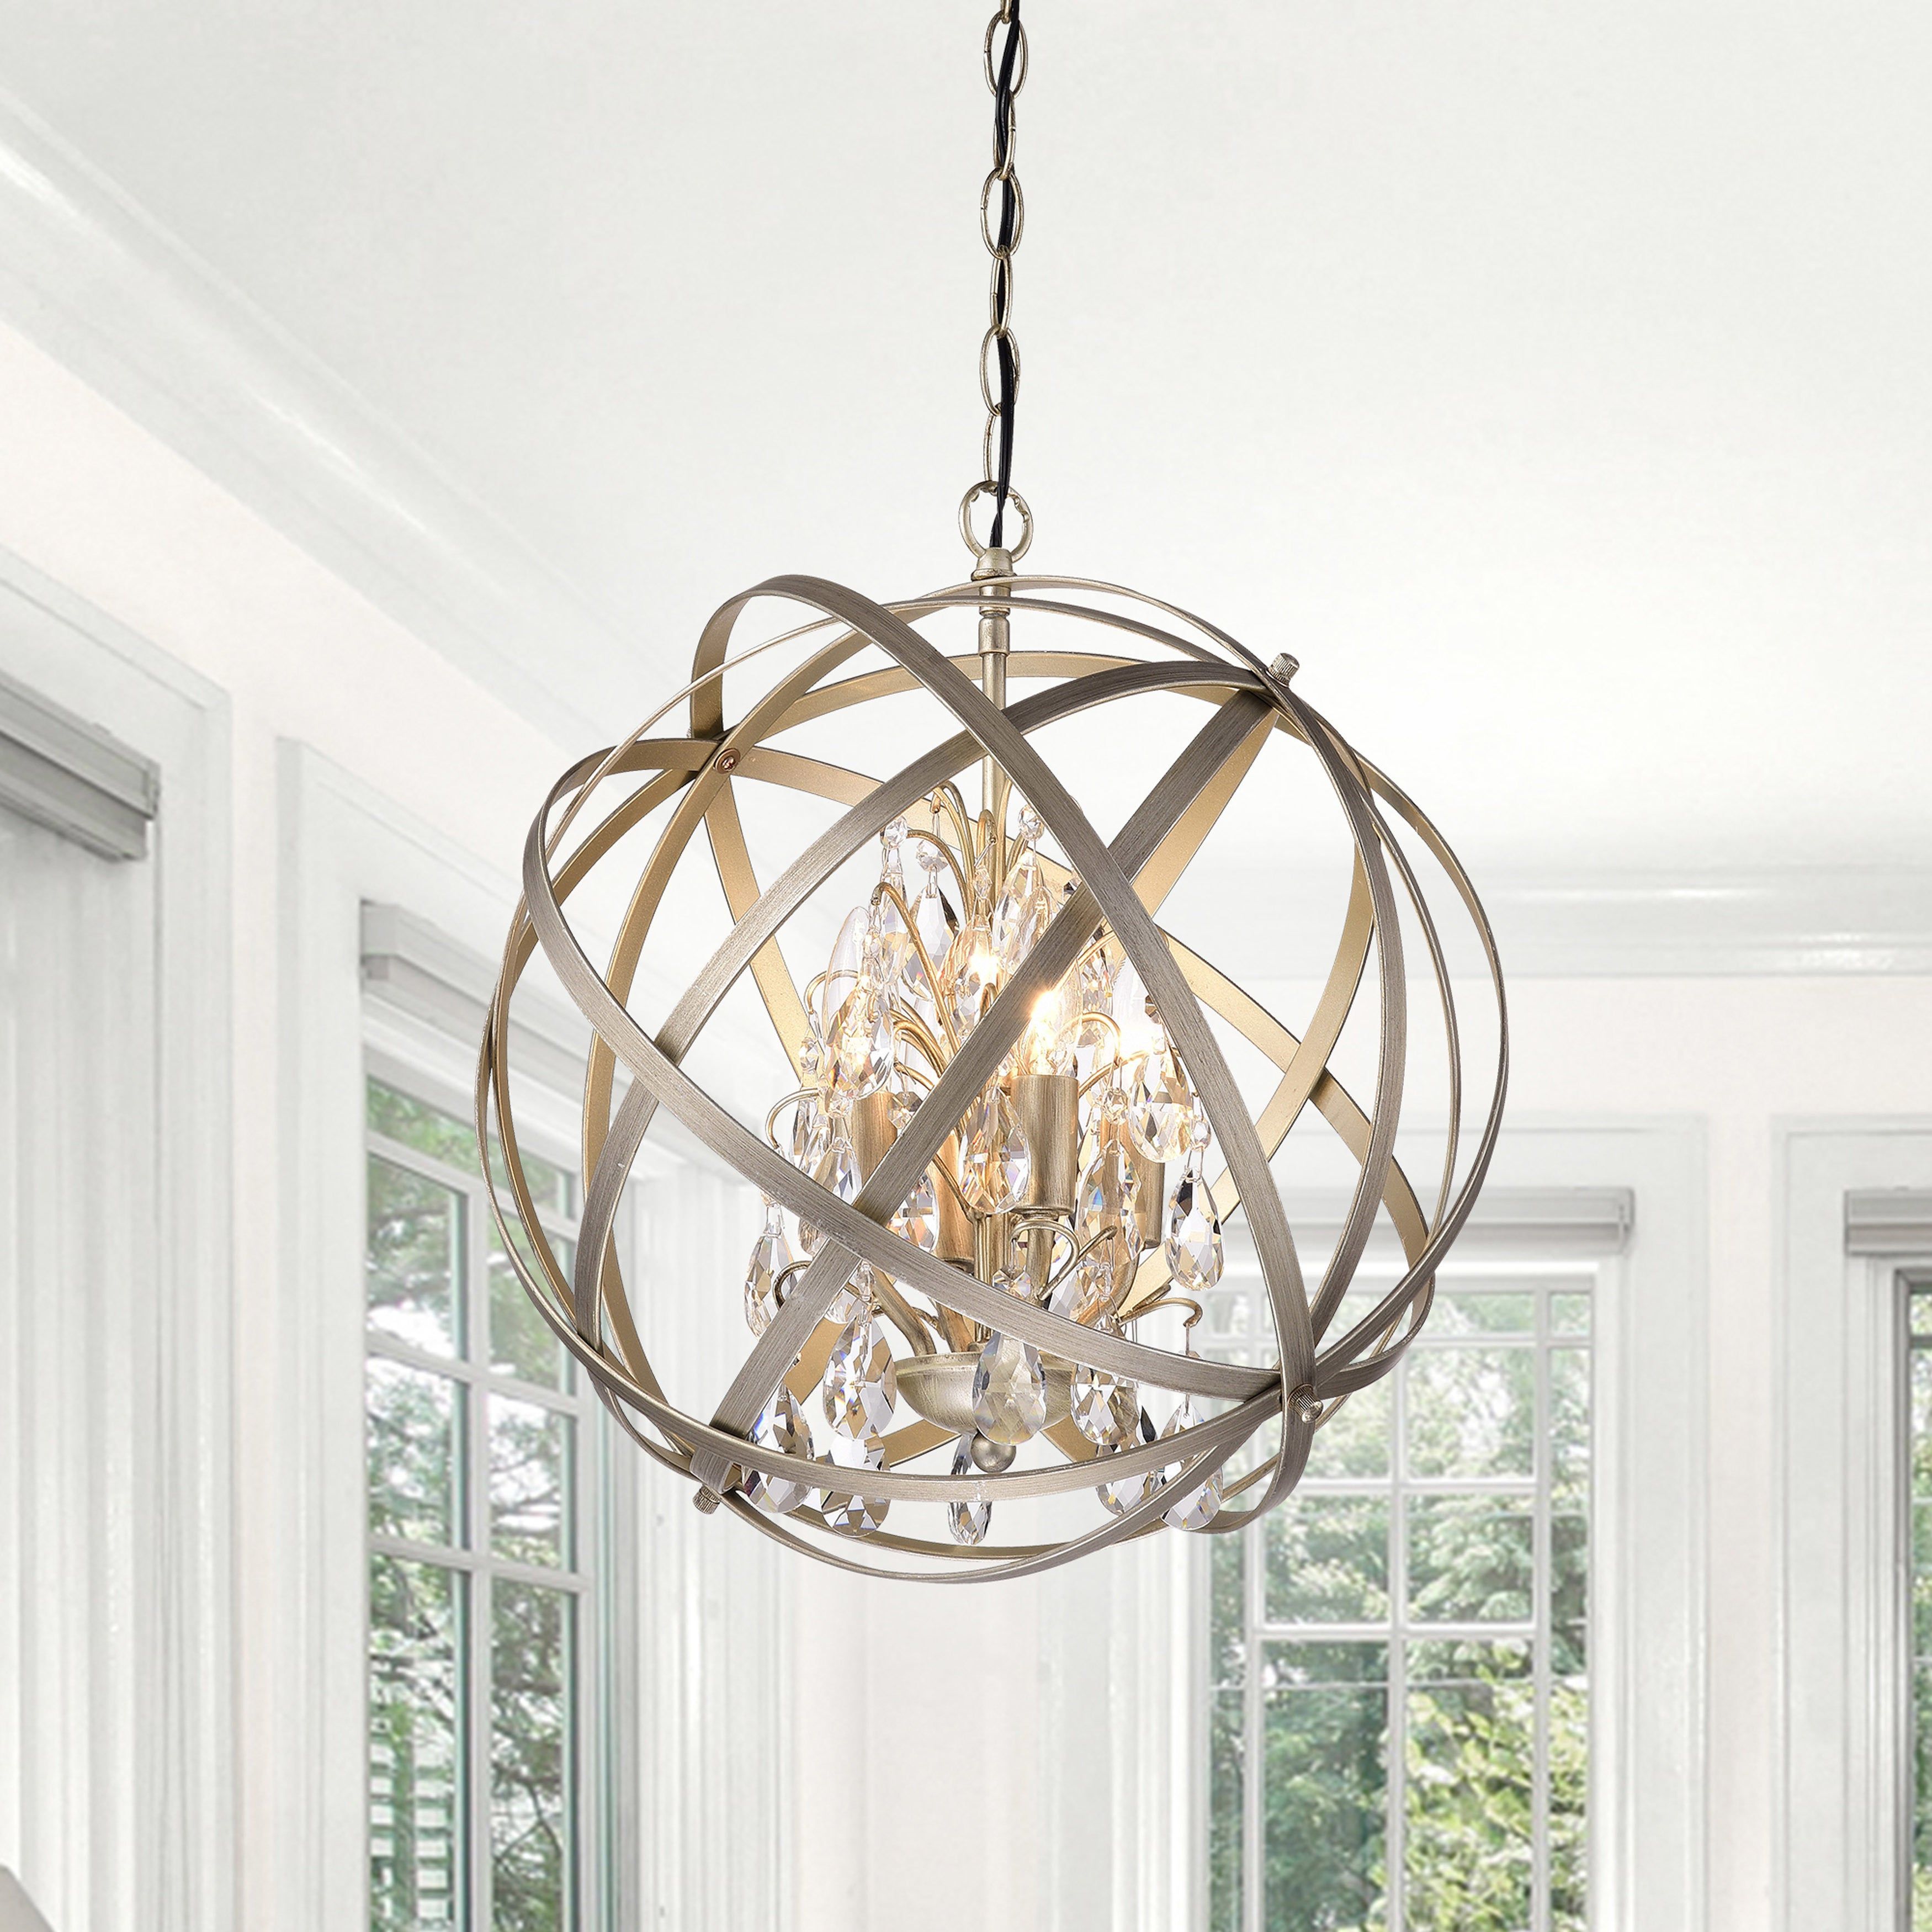 Ceiling Lights | Shop Our Best Lighting & Ceiling Fans Deals With Regard To Berenice 3 Light Cluster Teardrop Pendants (View 29 of 30)